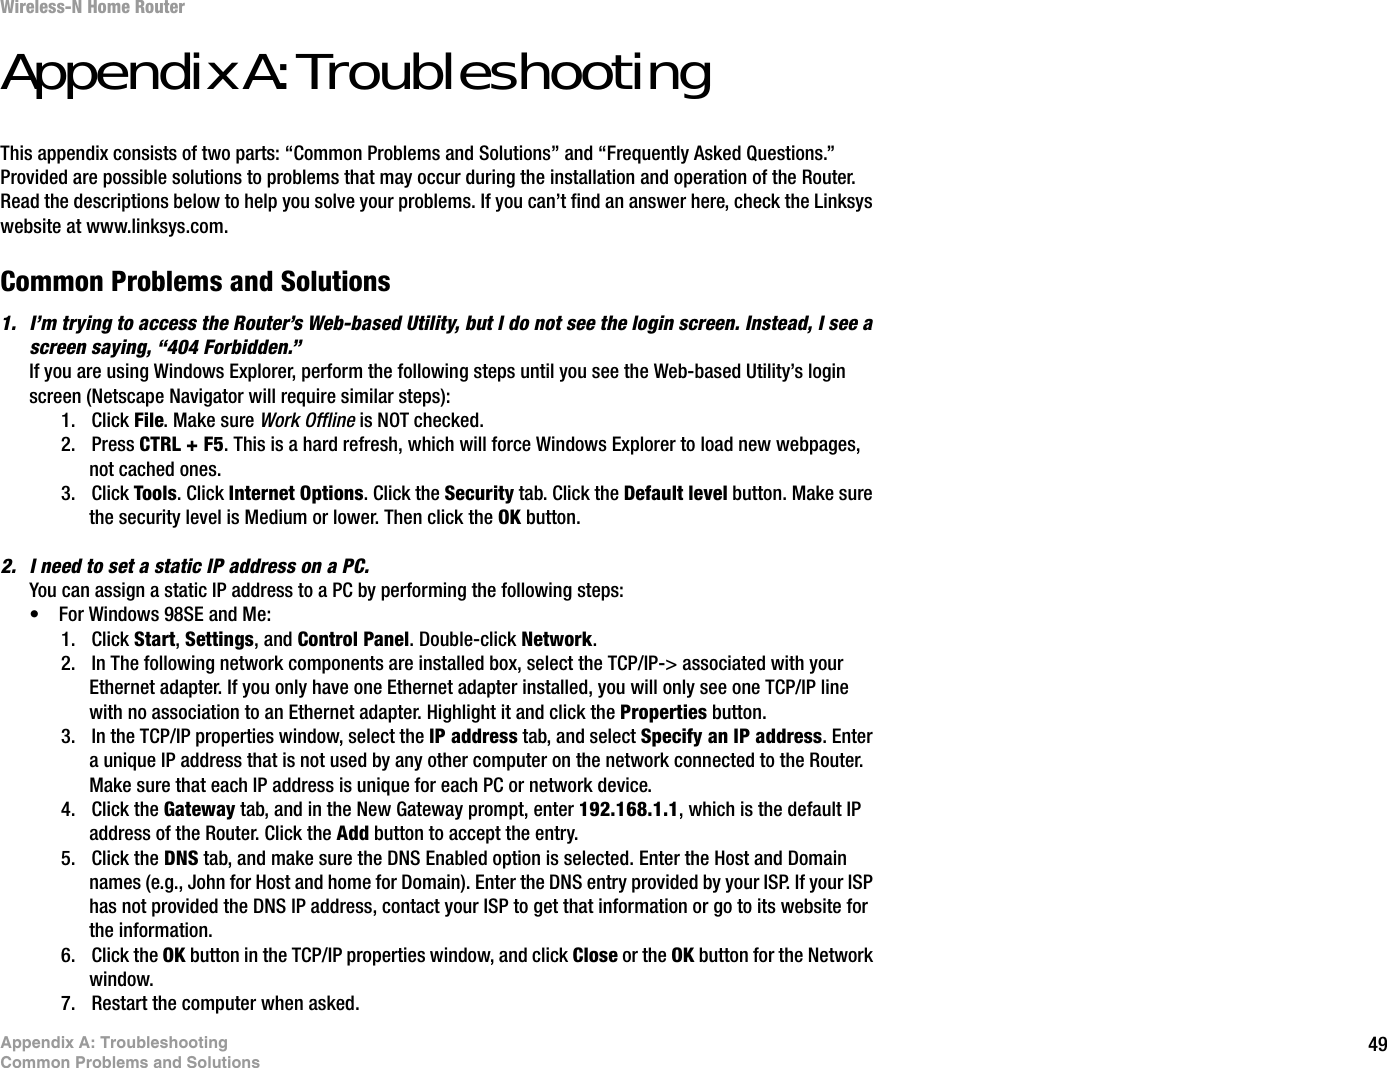 49Appendix A: TroubleshootingCommon Problems and SolutionsWireless-N Home RouterAppendix A: TroubleshootingThis appendix consists of two parts: “Common Problems and Solutions” and “Frequently Asked Questions.” Provided are possible solutions to problems that may occur during the installation and operation of the Router. Read the descriptions below to help you solve your problems. If you can’t find an answer here, check the Linksys website at www.linksys.com.Common Problems and Solutions1. I’m trying to access the Router’s Web-based Utility, but I do not see the login screen. Instead, I see a screen saying, “404 Forbidden.”If you are using Windows Explorer, perform the following steps until you see the Web-based Utility’s login screen (Netscape Navigator will require similar steps):1. Click File. Make sure Work Offline is NOT checked.2. Press CTRL + F5. This is a hard refresh, which will force Windows Explorer to load new webpages, not cached ones.3. Click Tools. Click Internet Options. Click the Security tab. Click the Default level button. Make sure the security level is Medium or lower. Then click the OK button.2. I need to set a static IP address on a PC.You can assign a static IP address to a PC by performing the following steps:• For Windows 98SE and Me:1. Click Start,Settings, and Control Panel. Double-click Network.2. In The following network components are installed box, select the TCP/IP-&gt; associated with your Ethernet adapter. If you only have one Ethernet adapter installed, you will only see one TCP/IP line with no association to an Ethernet adapter. Highlight it and click the Properties button.3. In the TCP/IP properties window, select the IP address tab, and select Specify an IP address. Enter a unique IP address that is not used by any other computer on the network connected to the Router. Make sure that each IP address is unique for each PC or network device.4. Click the Gateway tab, and in the New Gateway prompt, enter 192.168.1.1, which is the default IP address of the Router. Click the Add button to accept the entry.5. Click the DNS tab, and make sure the DNS Enabled option is selected. Enter the Host and Domain names (e.g., John for Host and home for Domain). Enter the DNS entry provided by your ISP. If your ISP has not provided the DNS IP address, contact your ISP to get that information or go to its website for the information.6. Click the OK button in the TCP/IP properties window, and click Close or the OK button for the Network window.7. Restart the computer when asked.